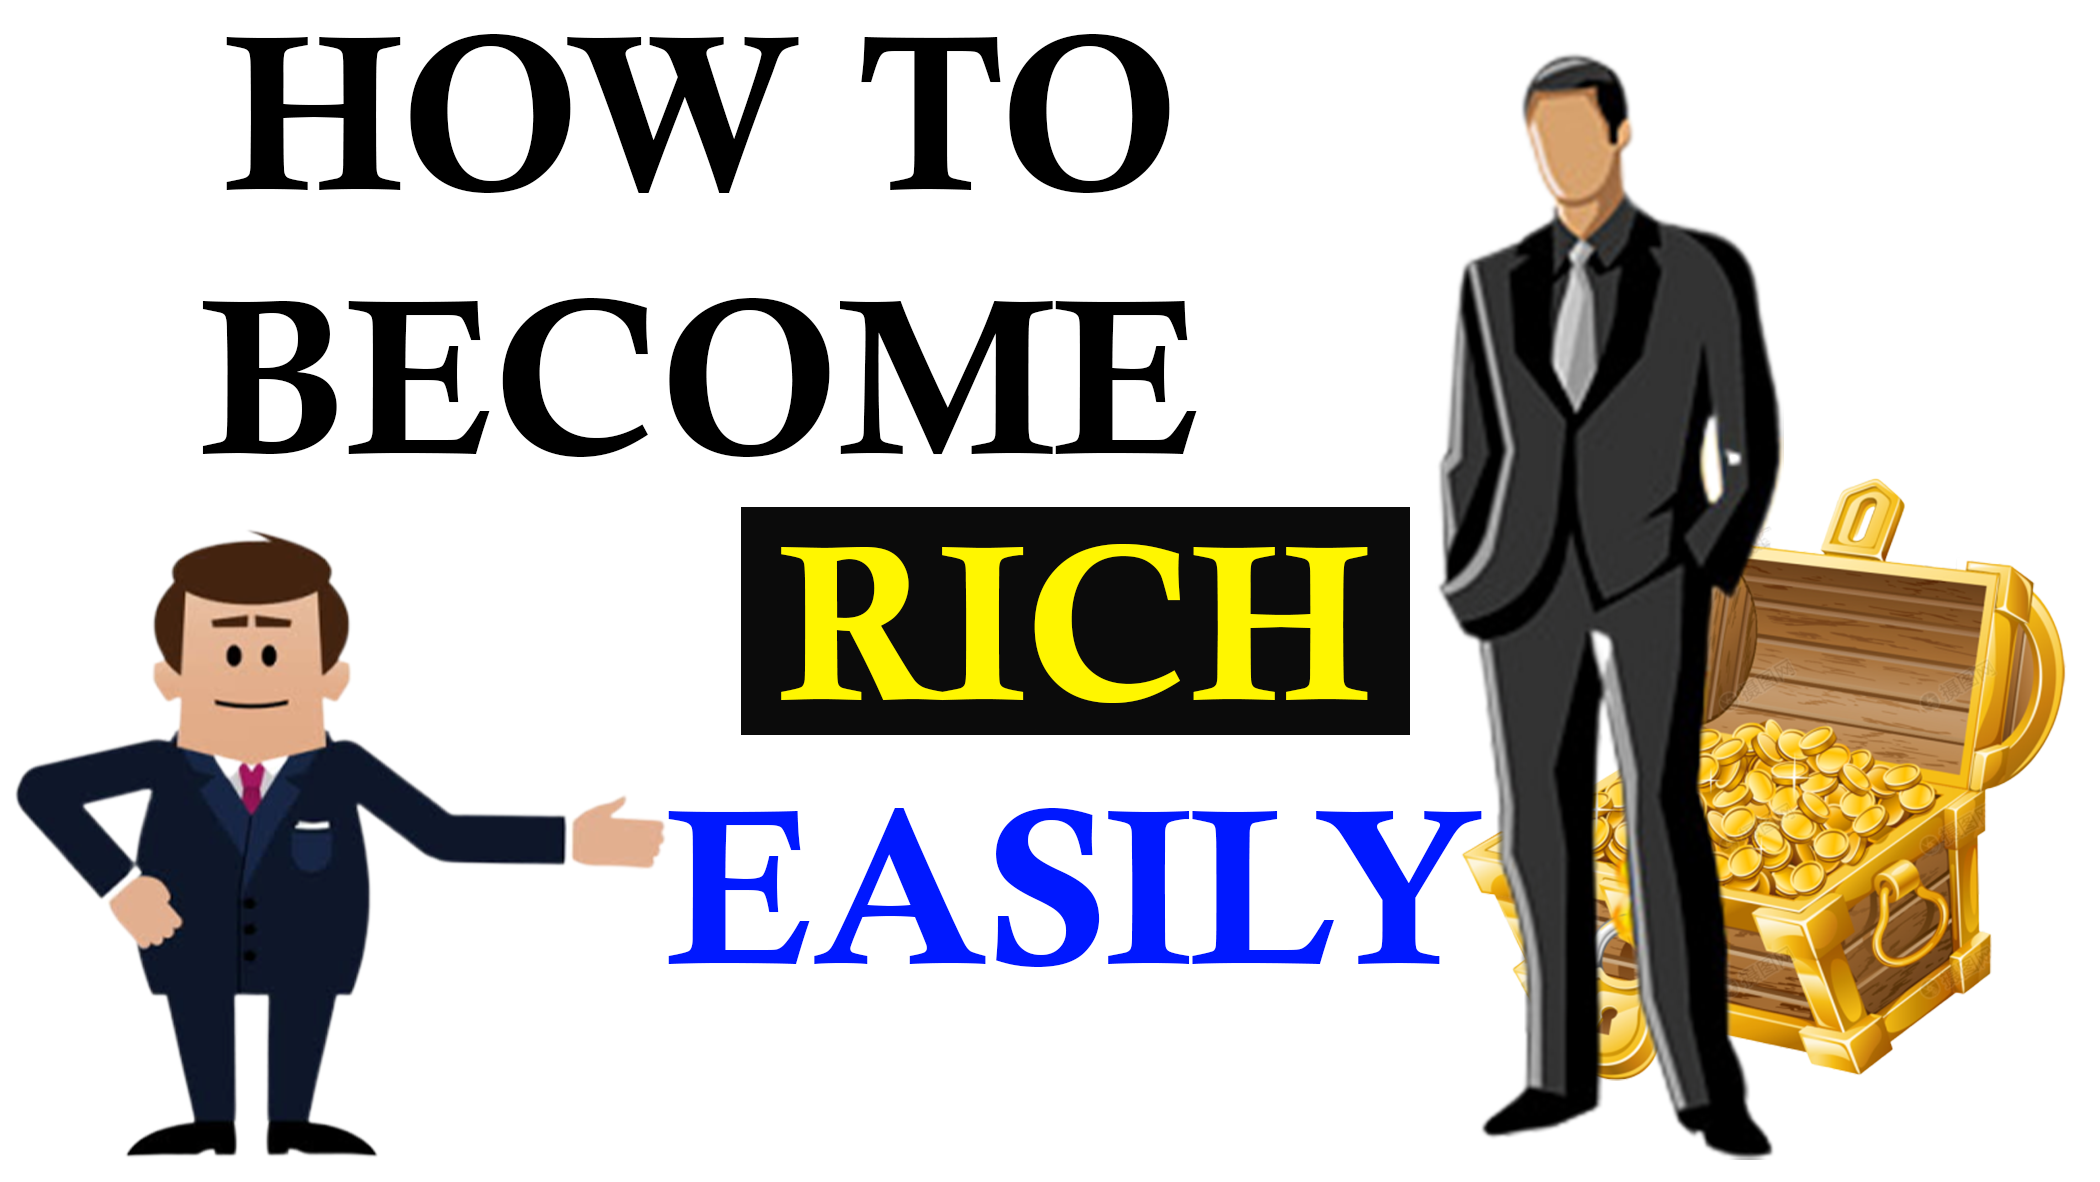 How to become Rich Easily